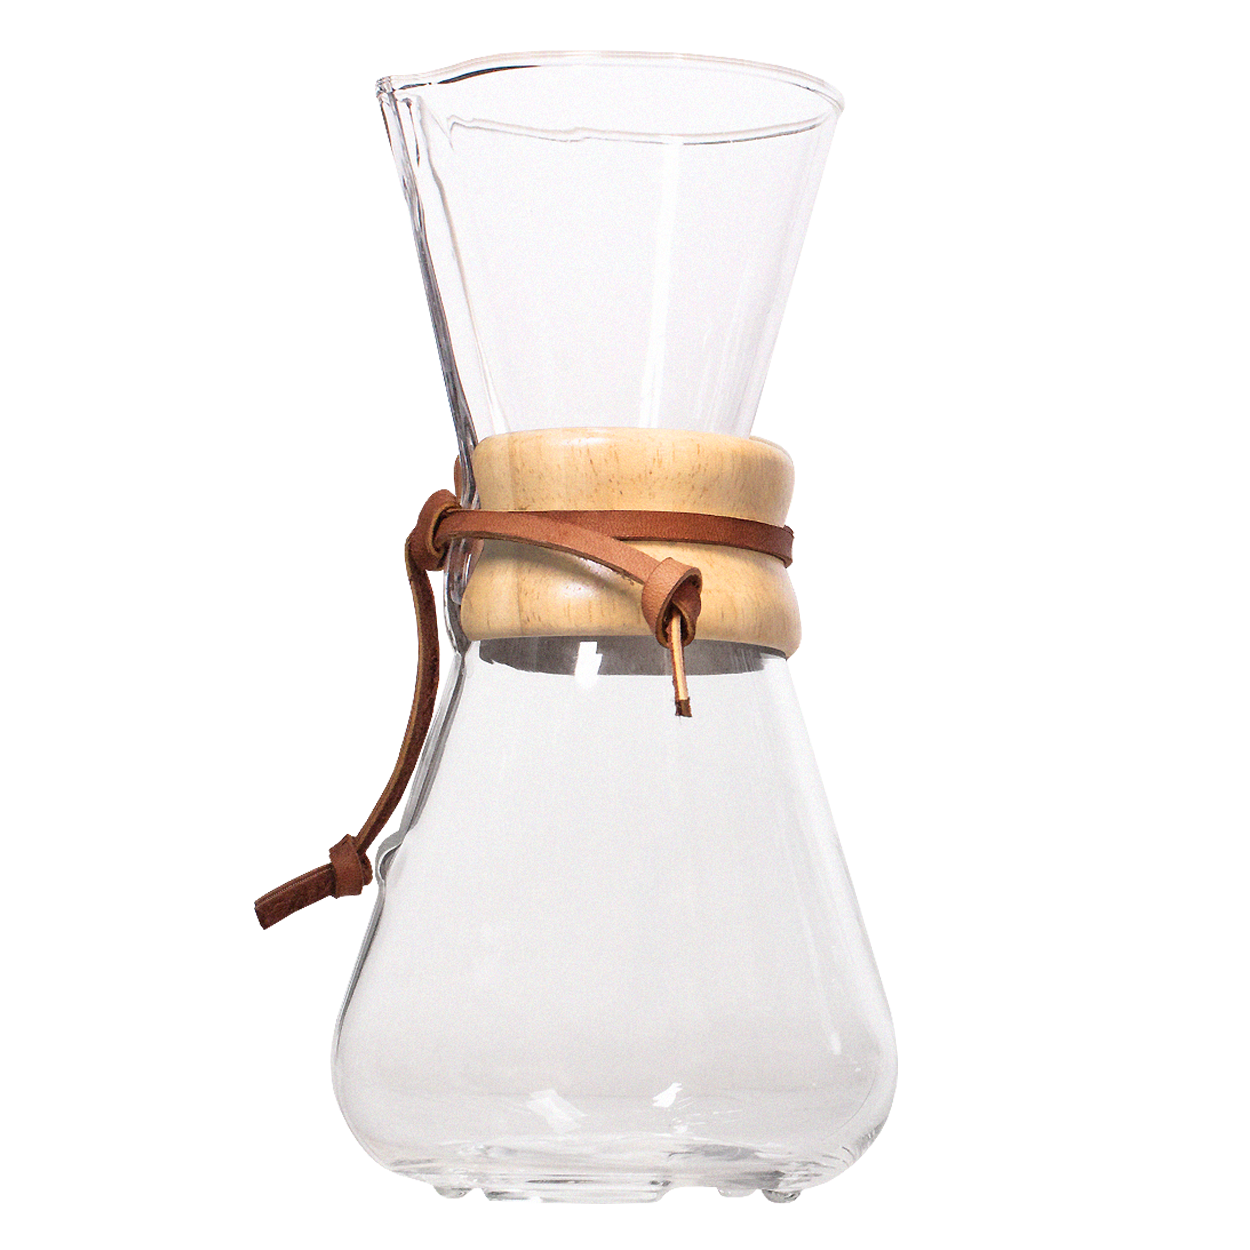 CHEMEX 8 CUP POUR-OVER COFFEEMAKER